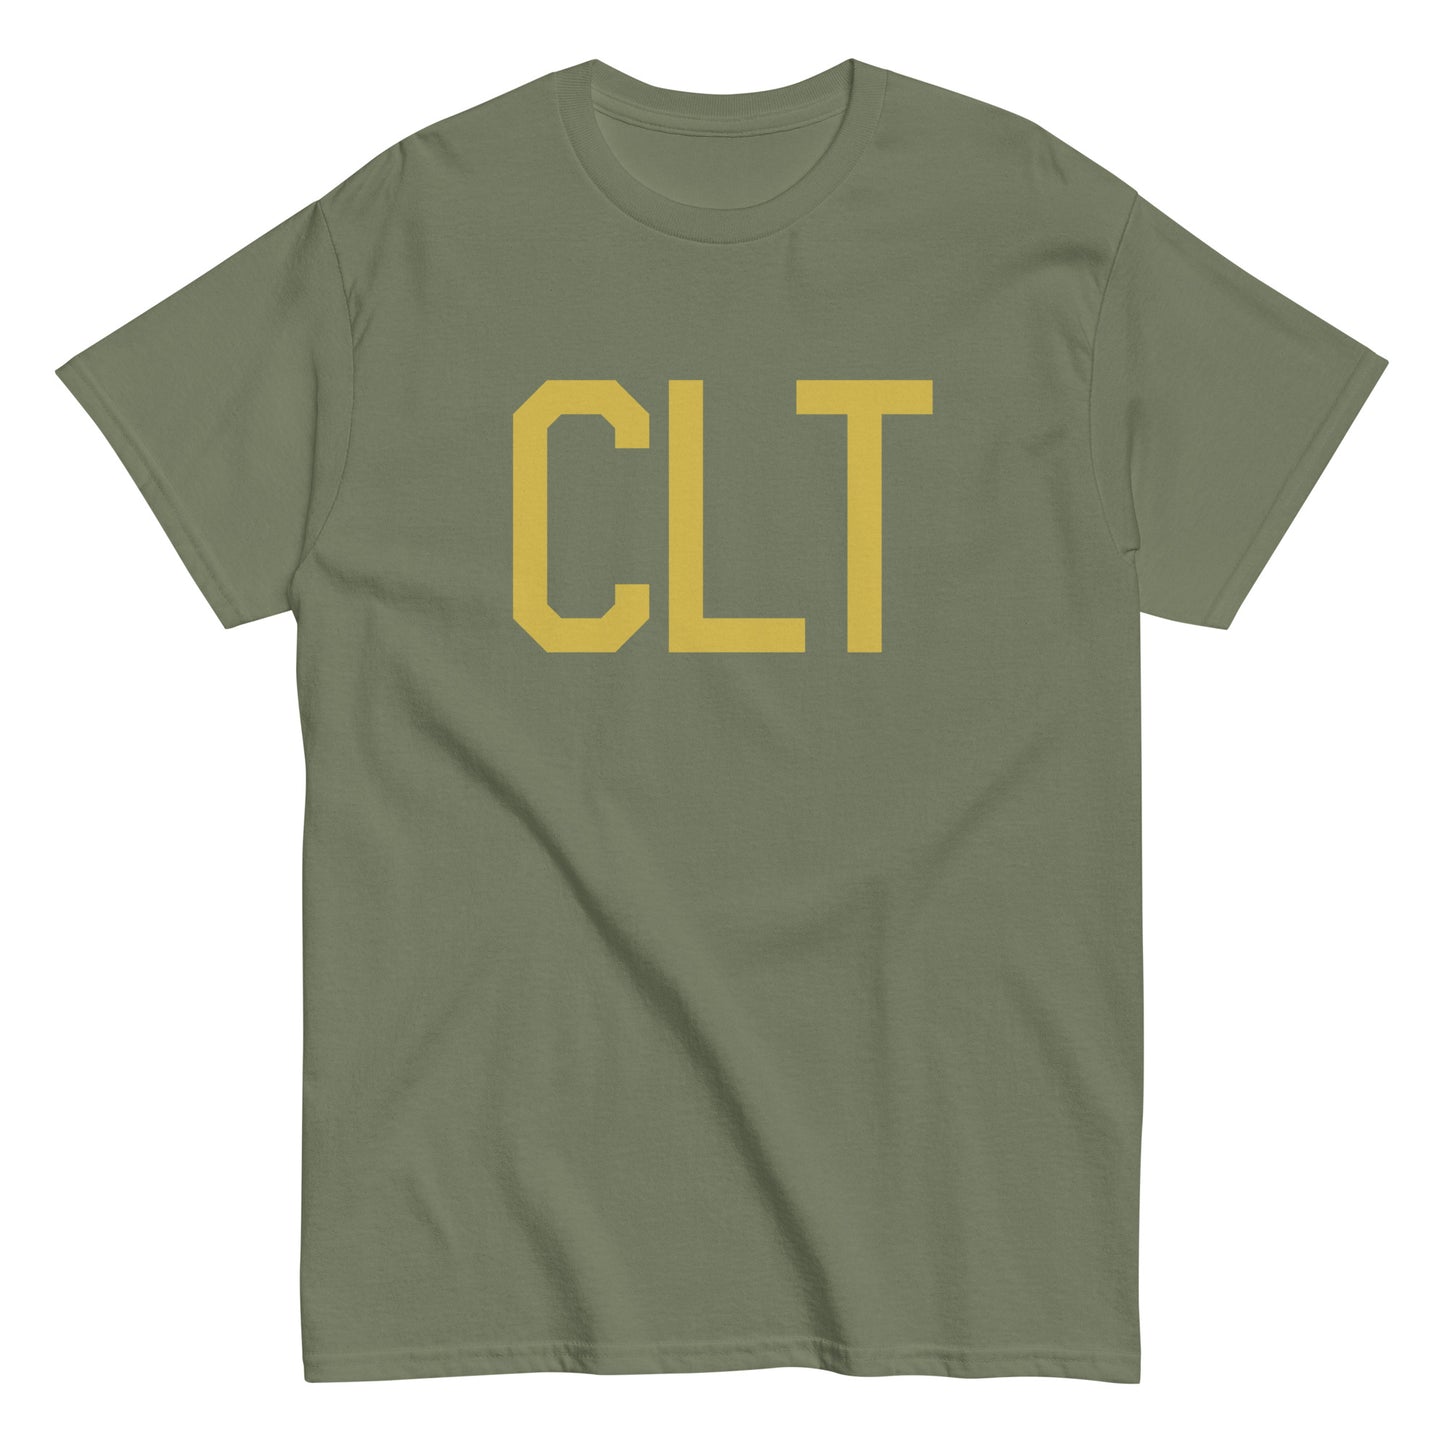 Aviation Enthusiast Men's Tee - Old Gold Graphic • CLT Charlotte • YHM Designs - Image 02